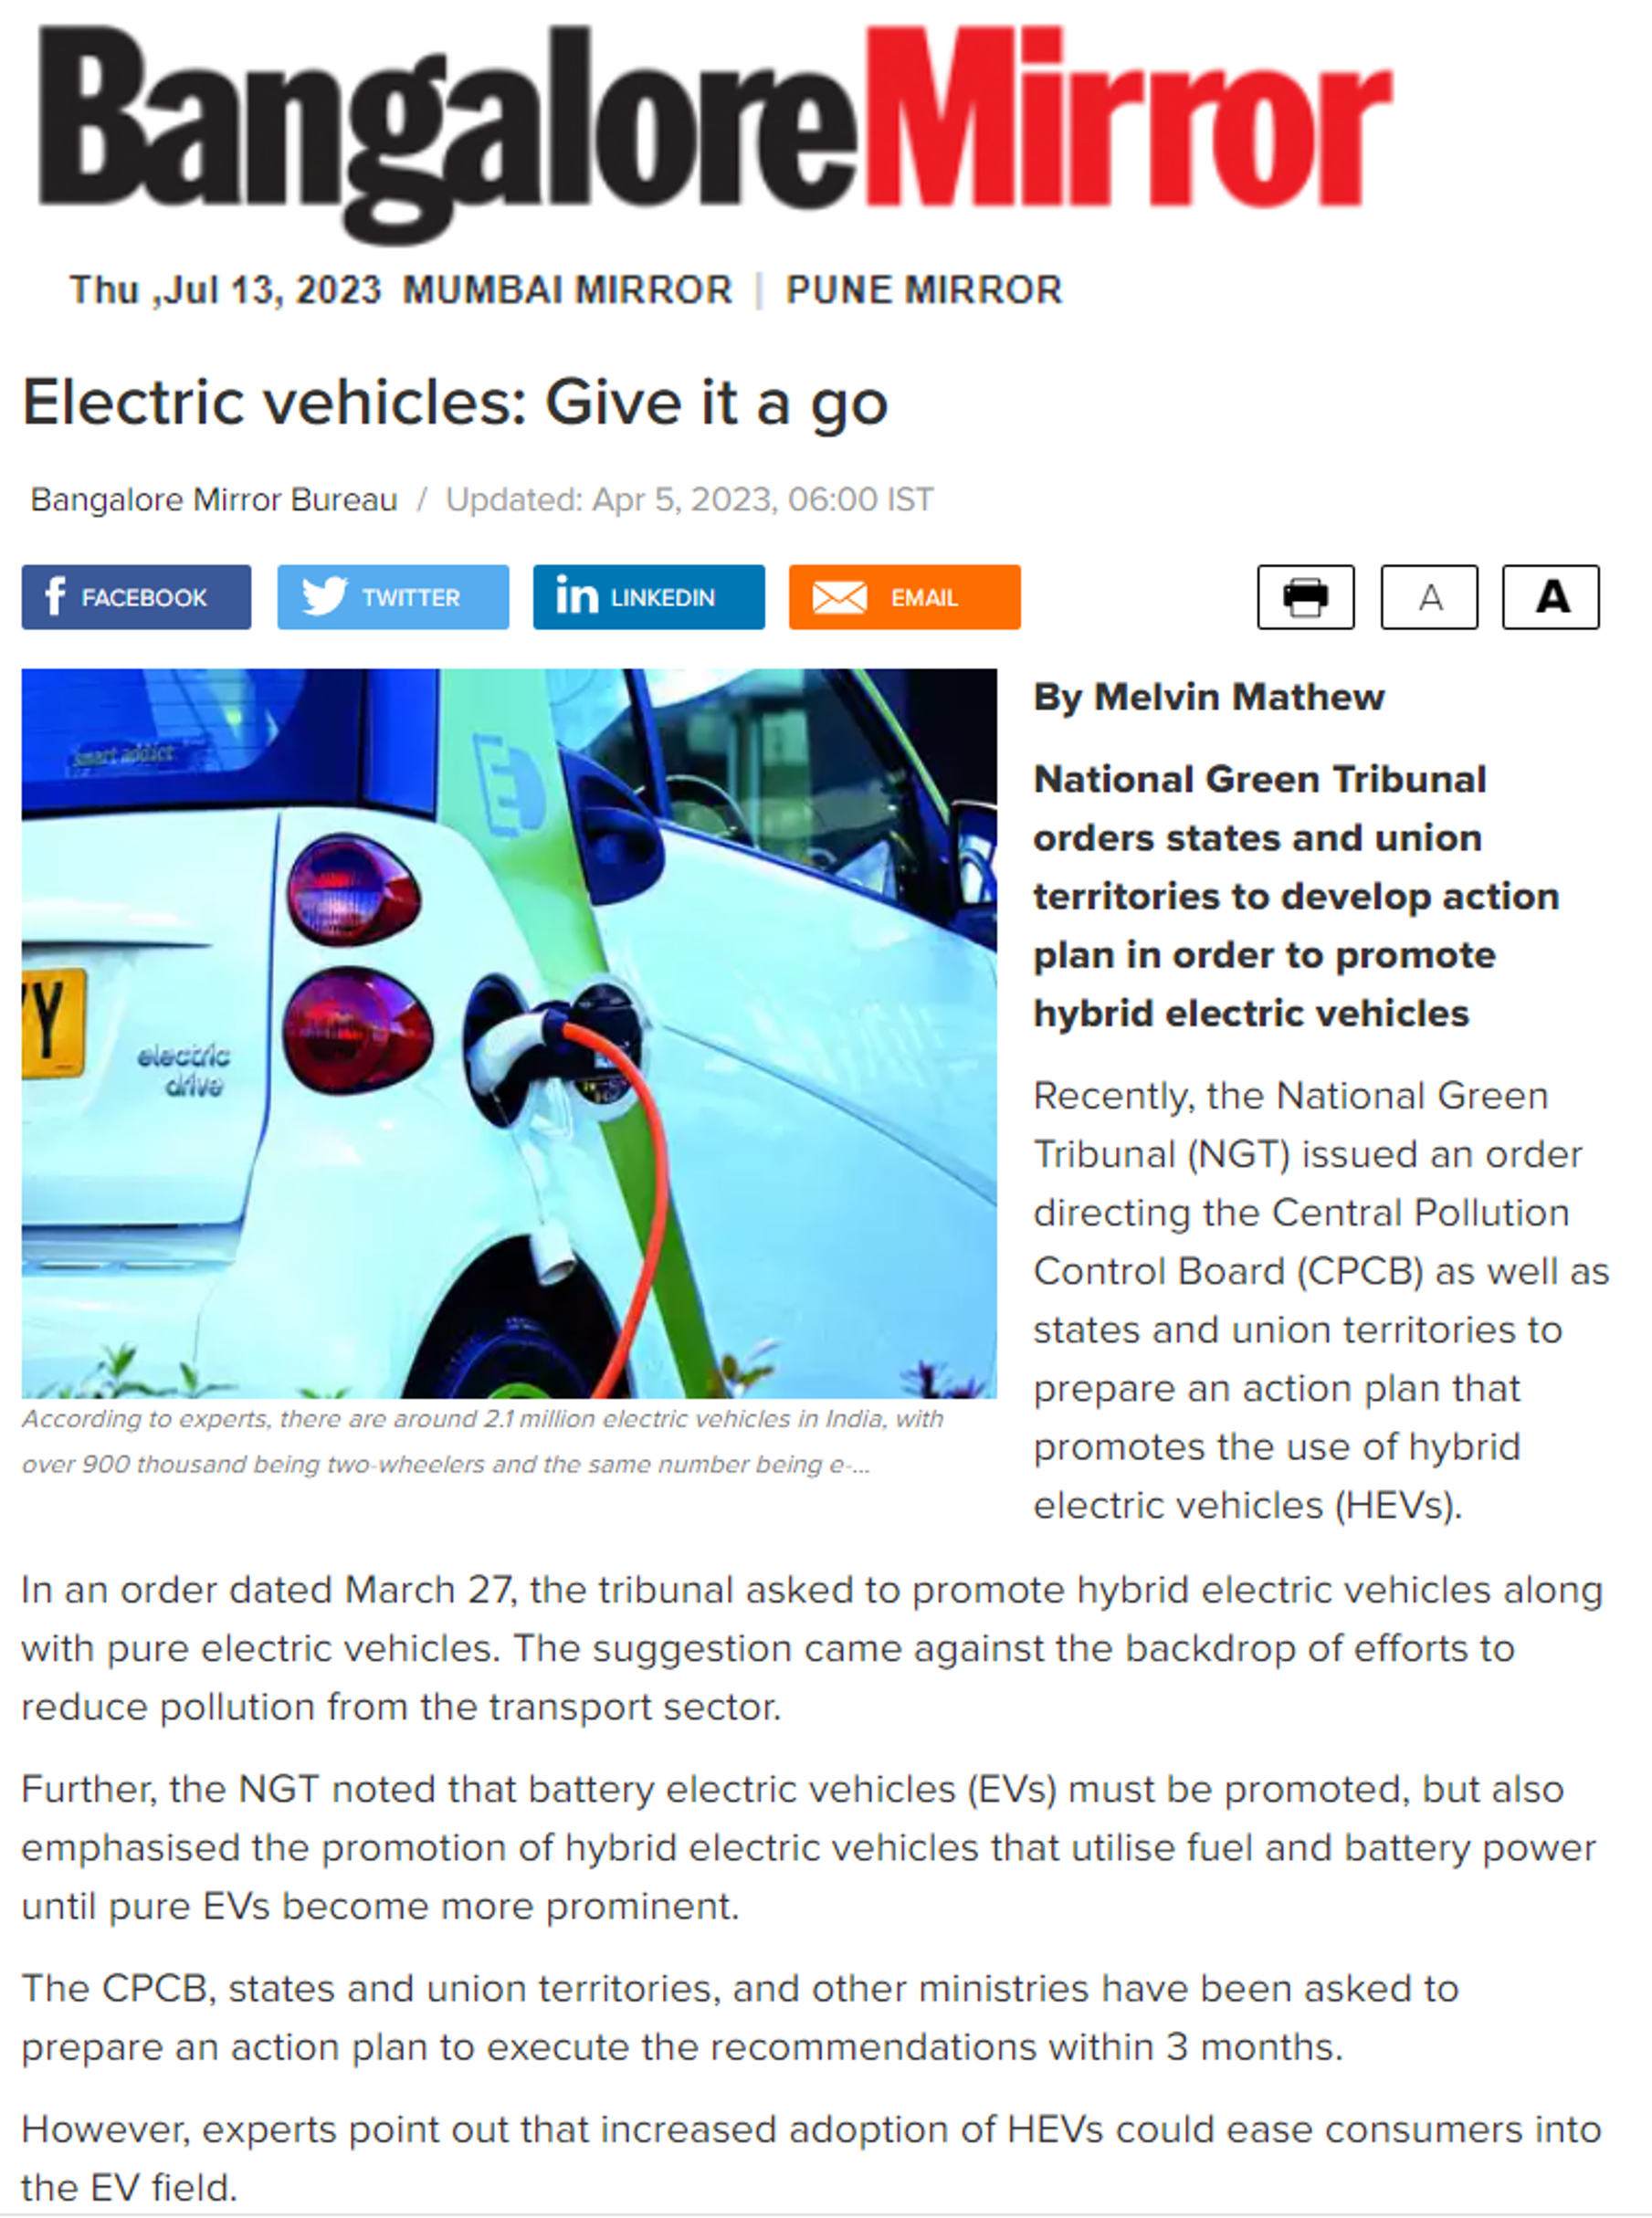 Spurthi Ravuri quoted by Bangalore Mirror on the importance of hybrid vehicles in India’s clean energy transition